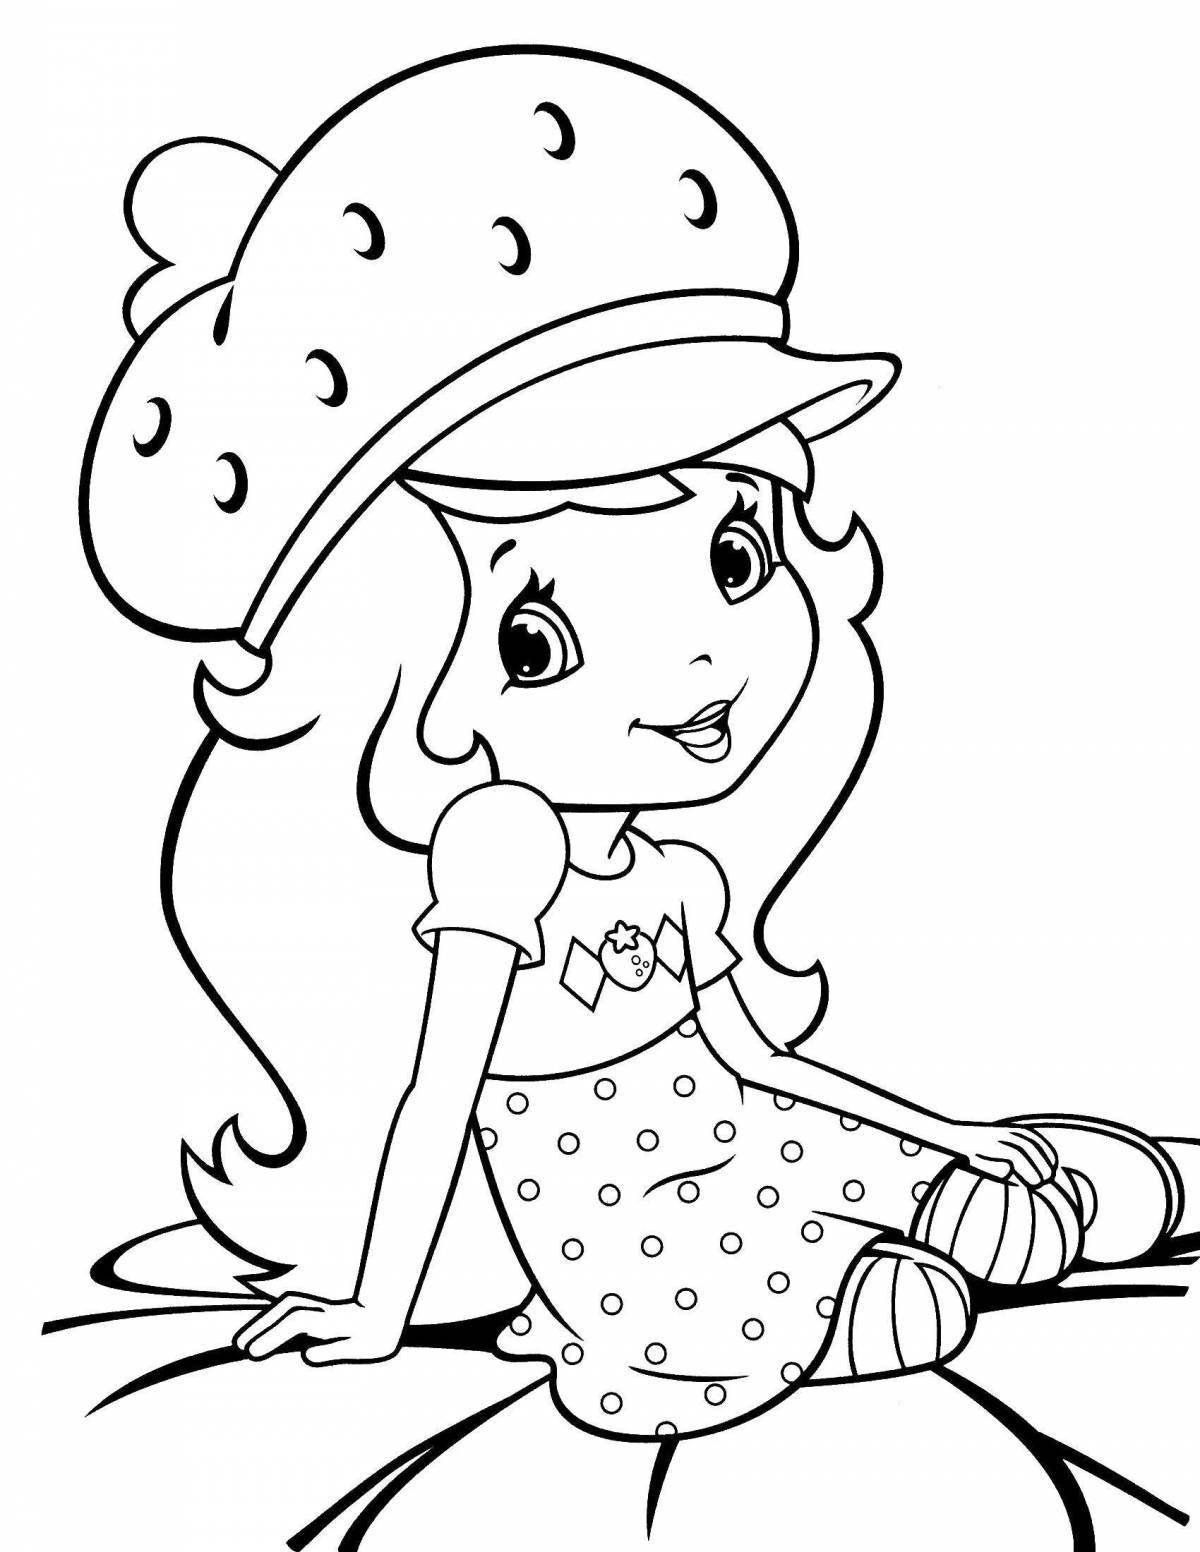 Coloring pages blushing strawberries